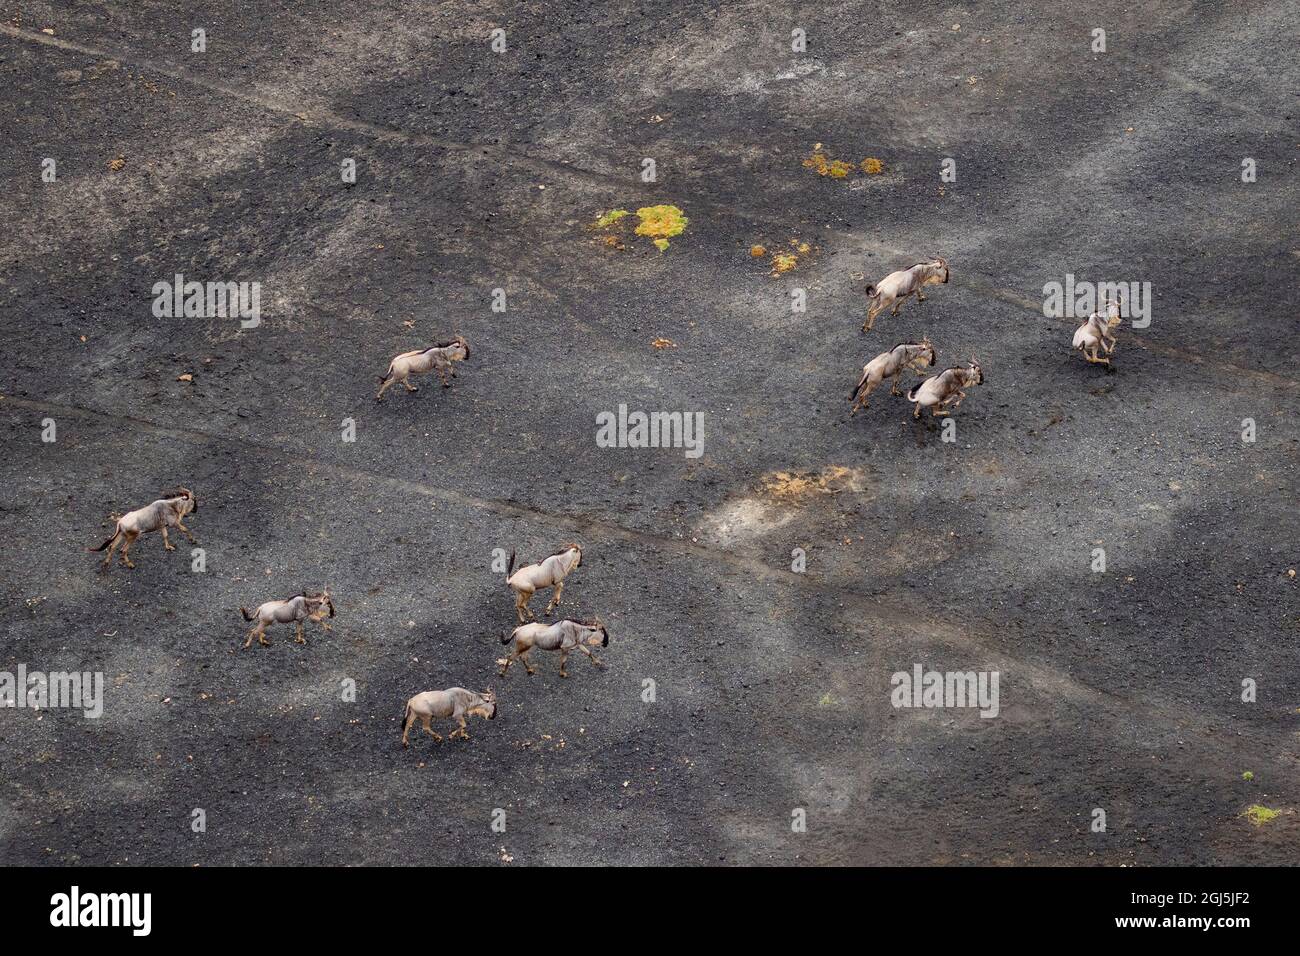 Africa, Tanzania, Aerial view of herd of Wildebeest (Connochaetes taurinus) running across barren slopes of volcano along shore of Lake Natron Stock Photo